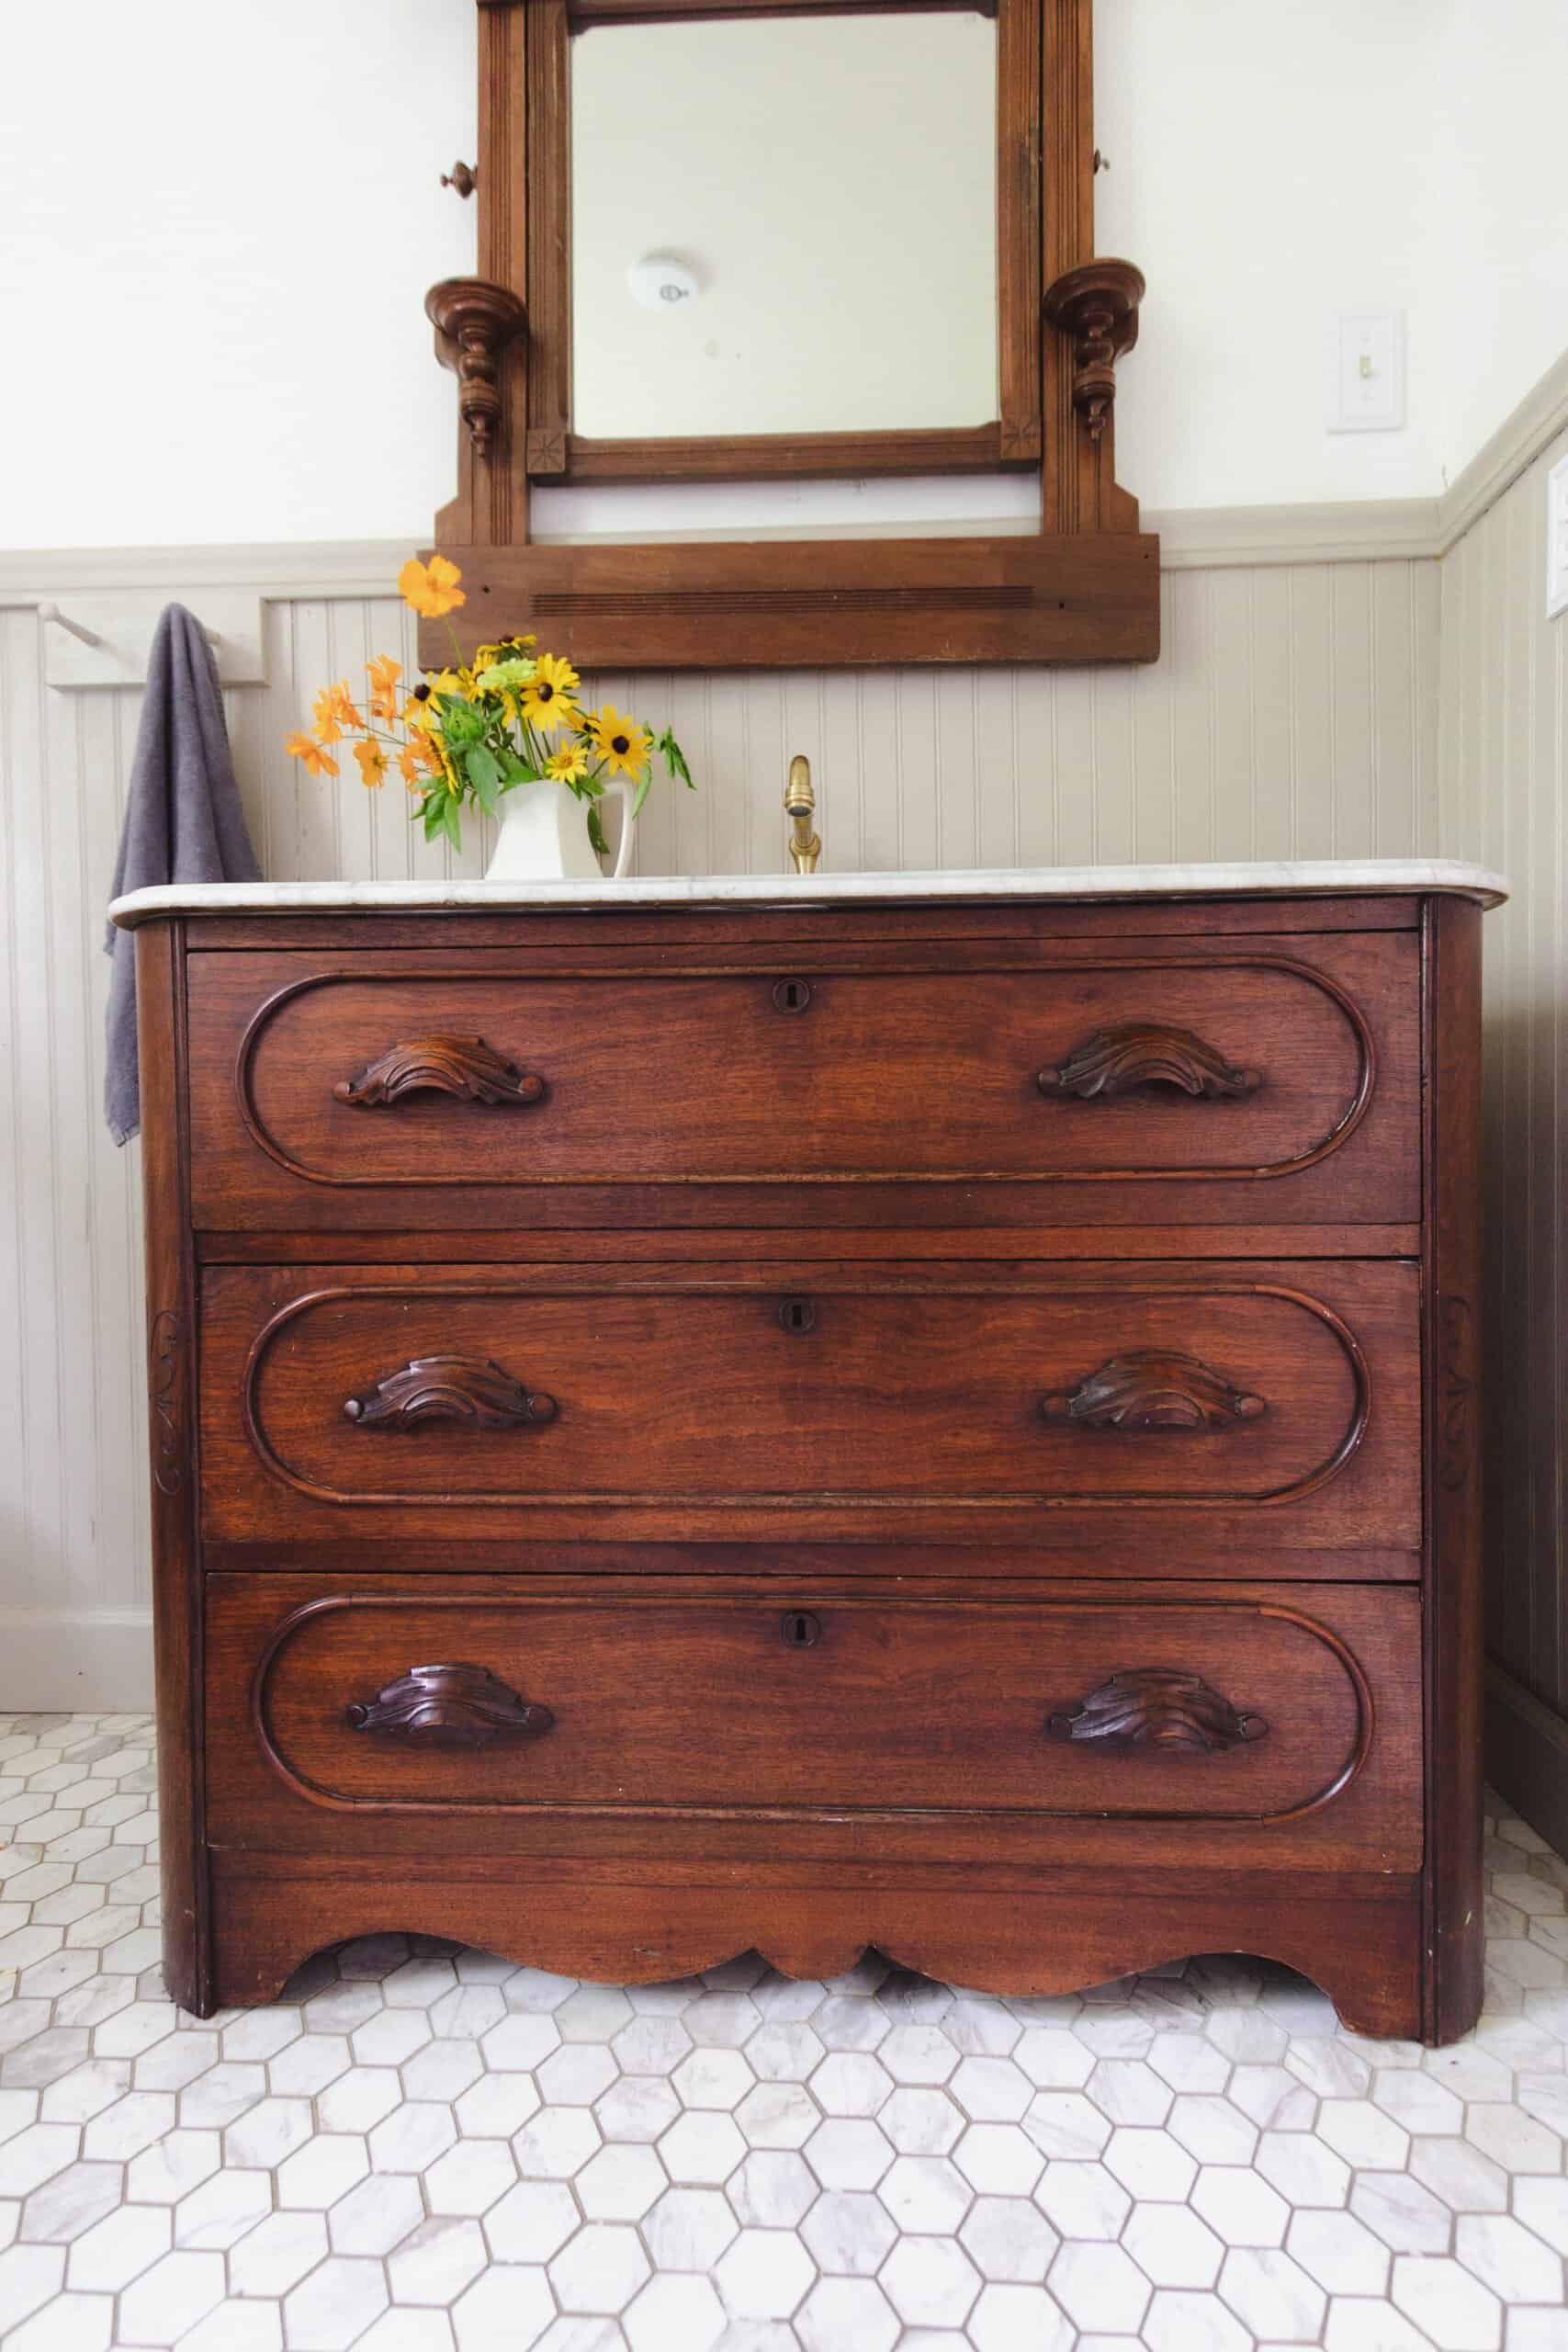 stained wooden antique dresser turned into a bathroom vanity with a marble top. A antique mirror hangs over the vanity.